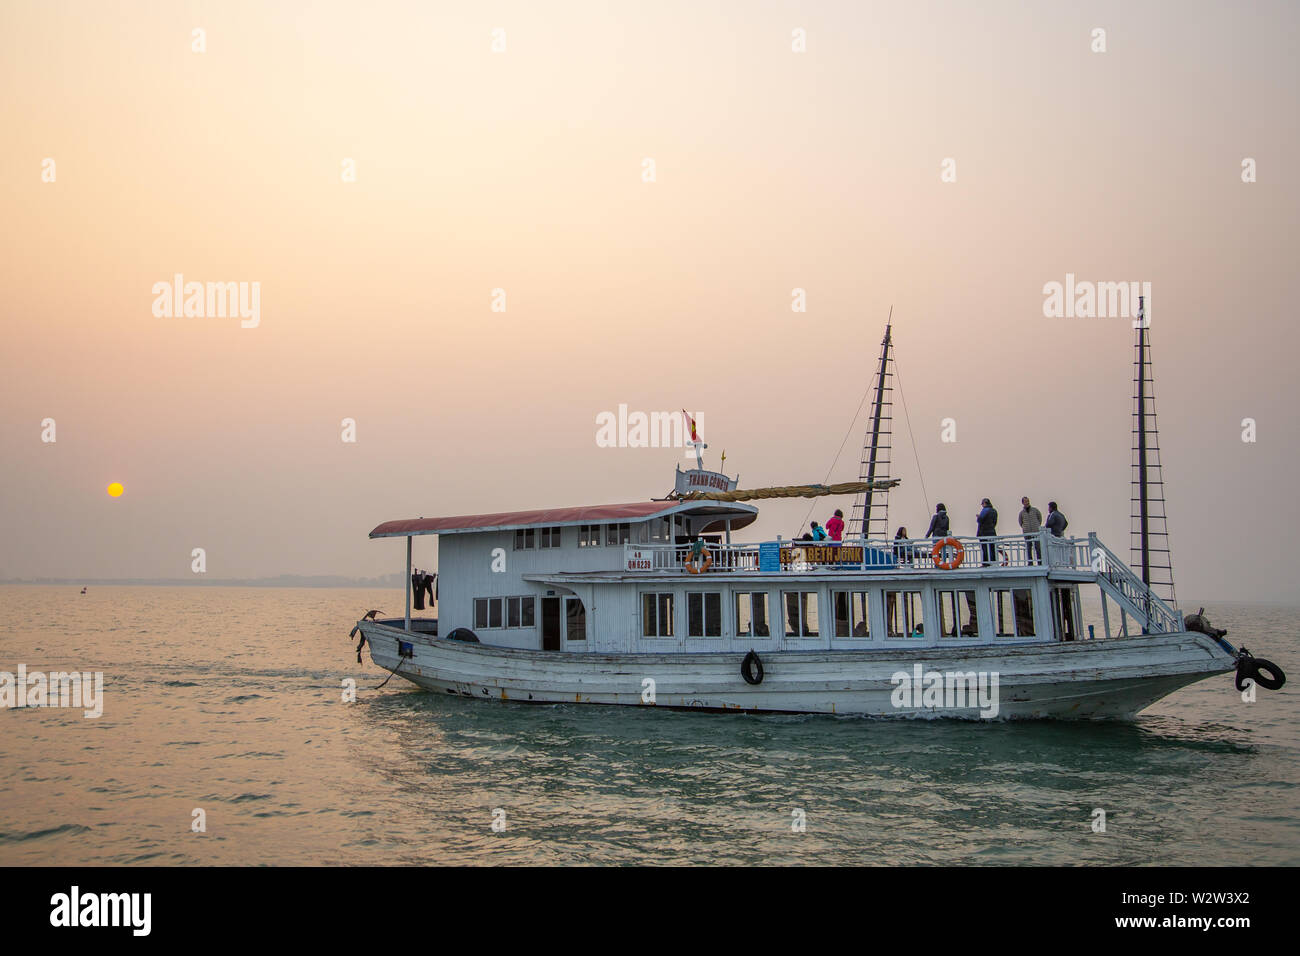 Halong Bay, Vietnam - December24, 2013:  Tourist boat navigating at Halong Bay with a few people regarding the sunset. Stock Photo